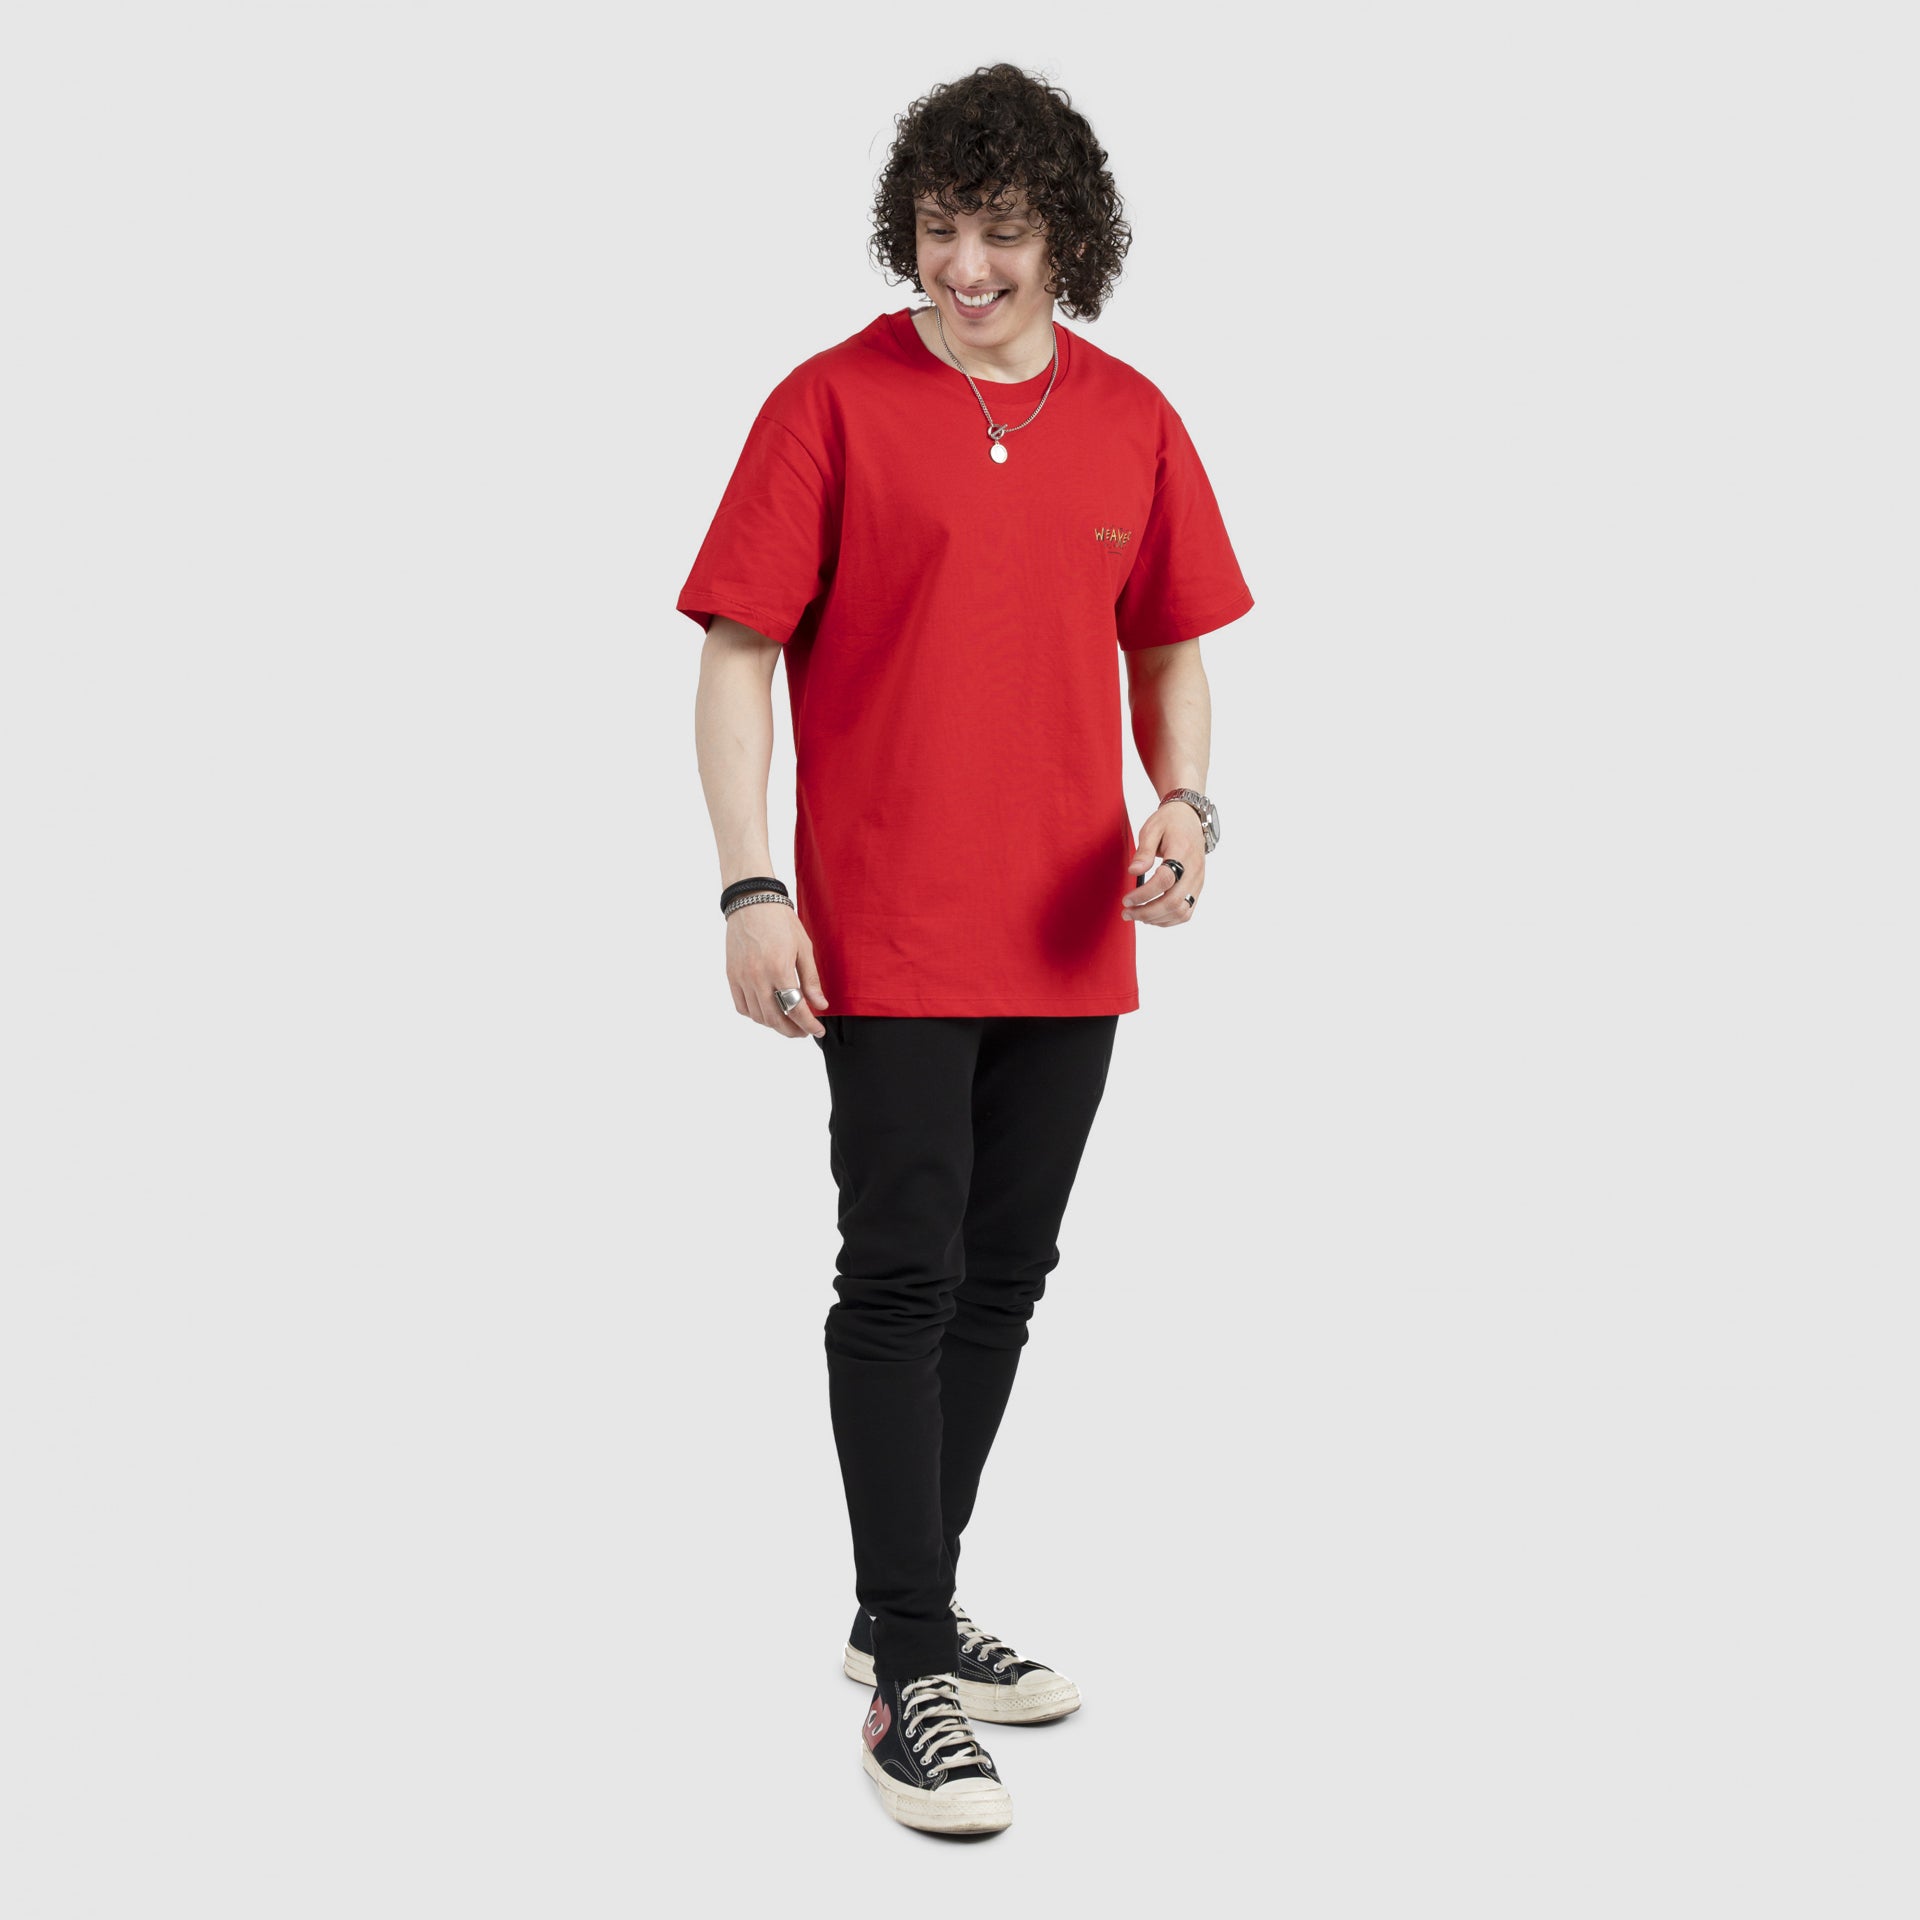 Red Classic T-Shirt From Weaver Design